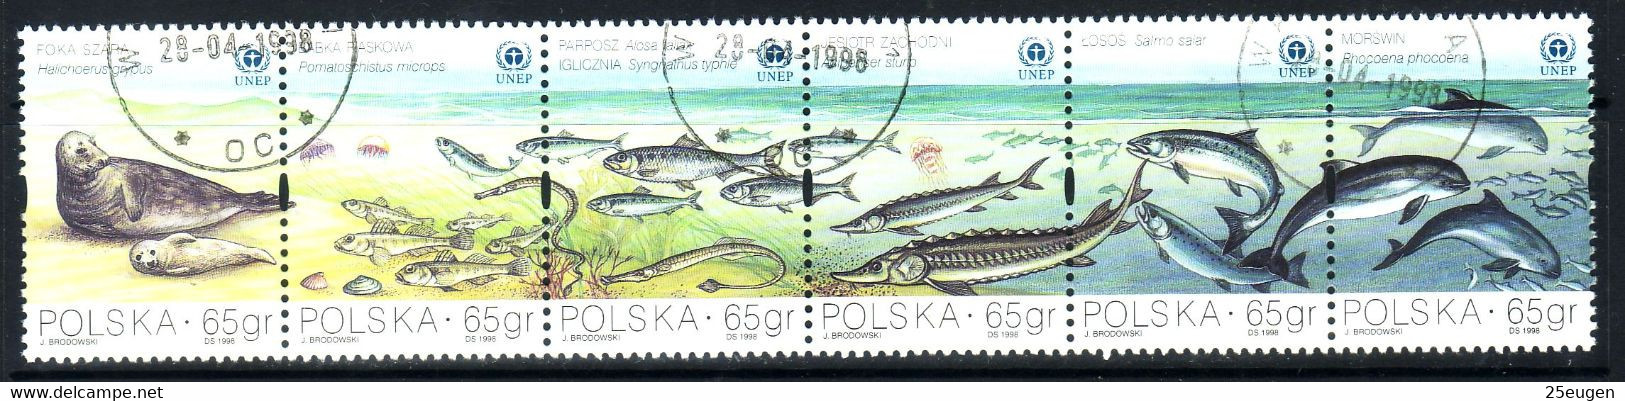 POLAND 1998 MICHEL No: 3706-11 USED - Used Stamps